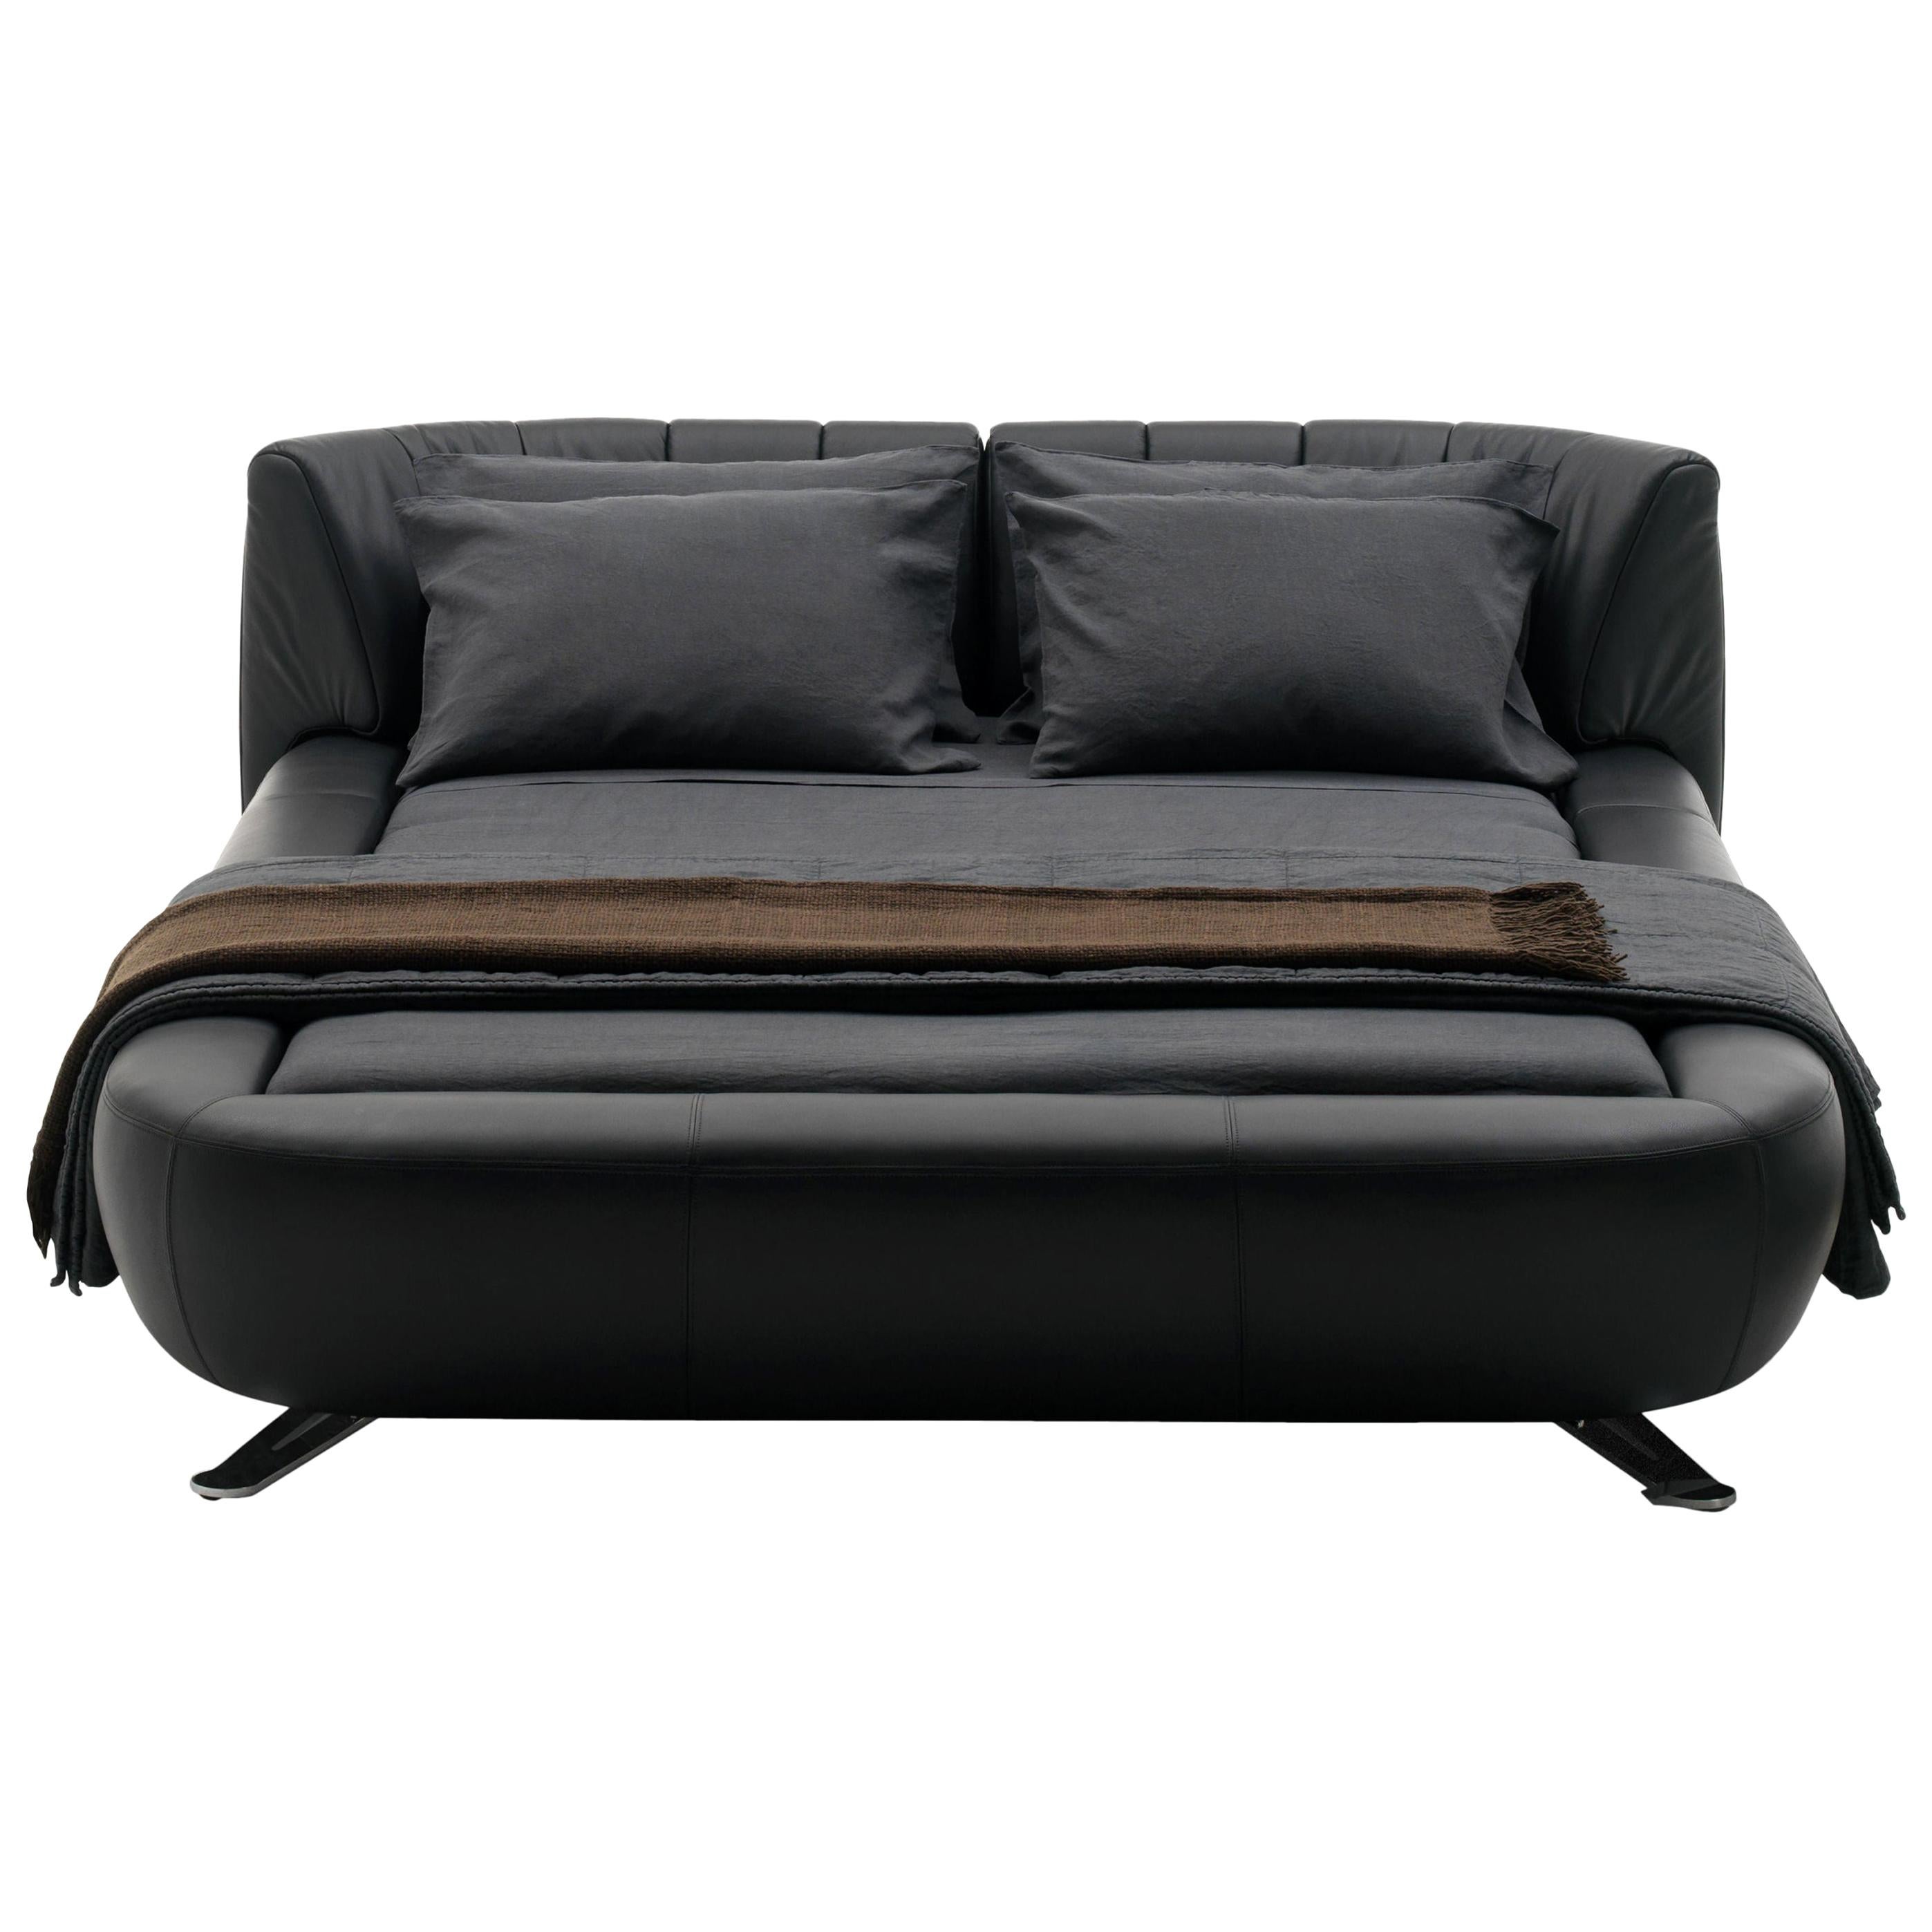 deSede DS-1164 Queen Size Leather Bed by Hugo de Ruiter For Sale